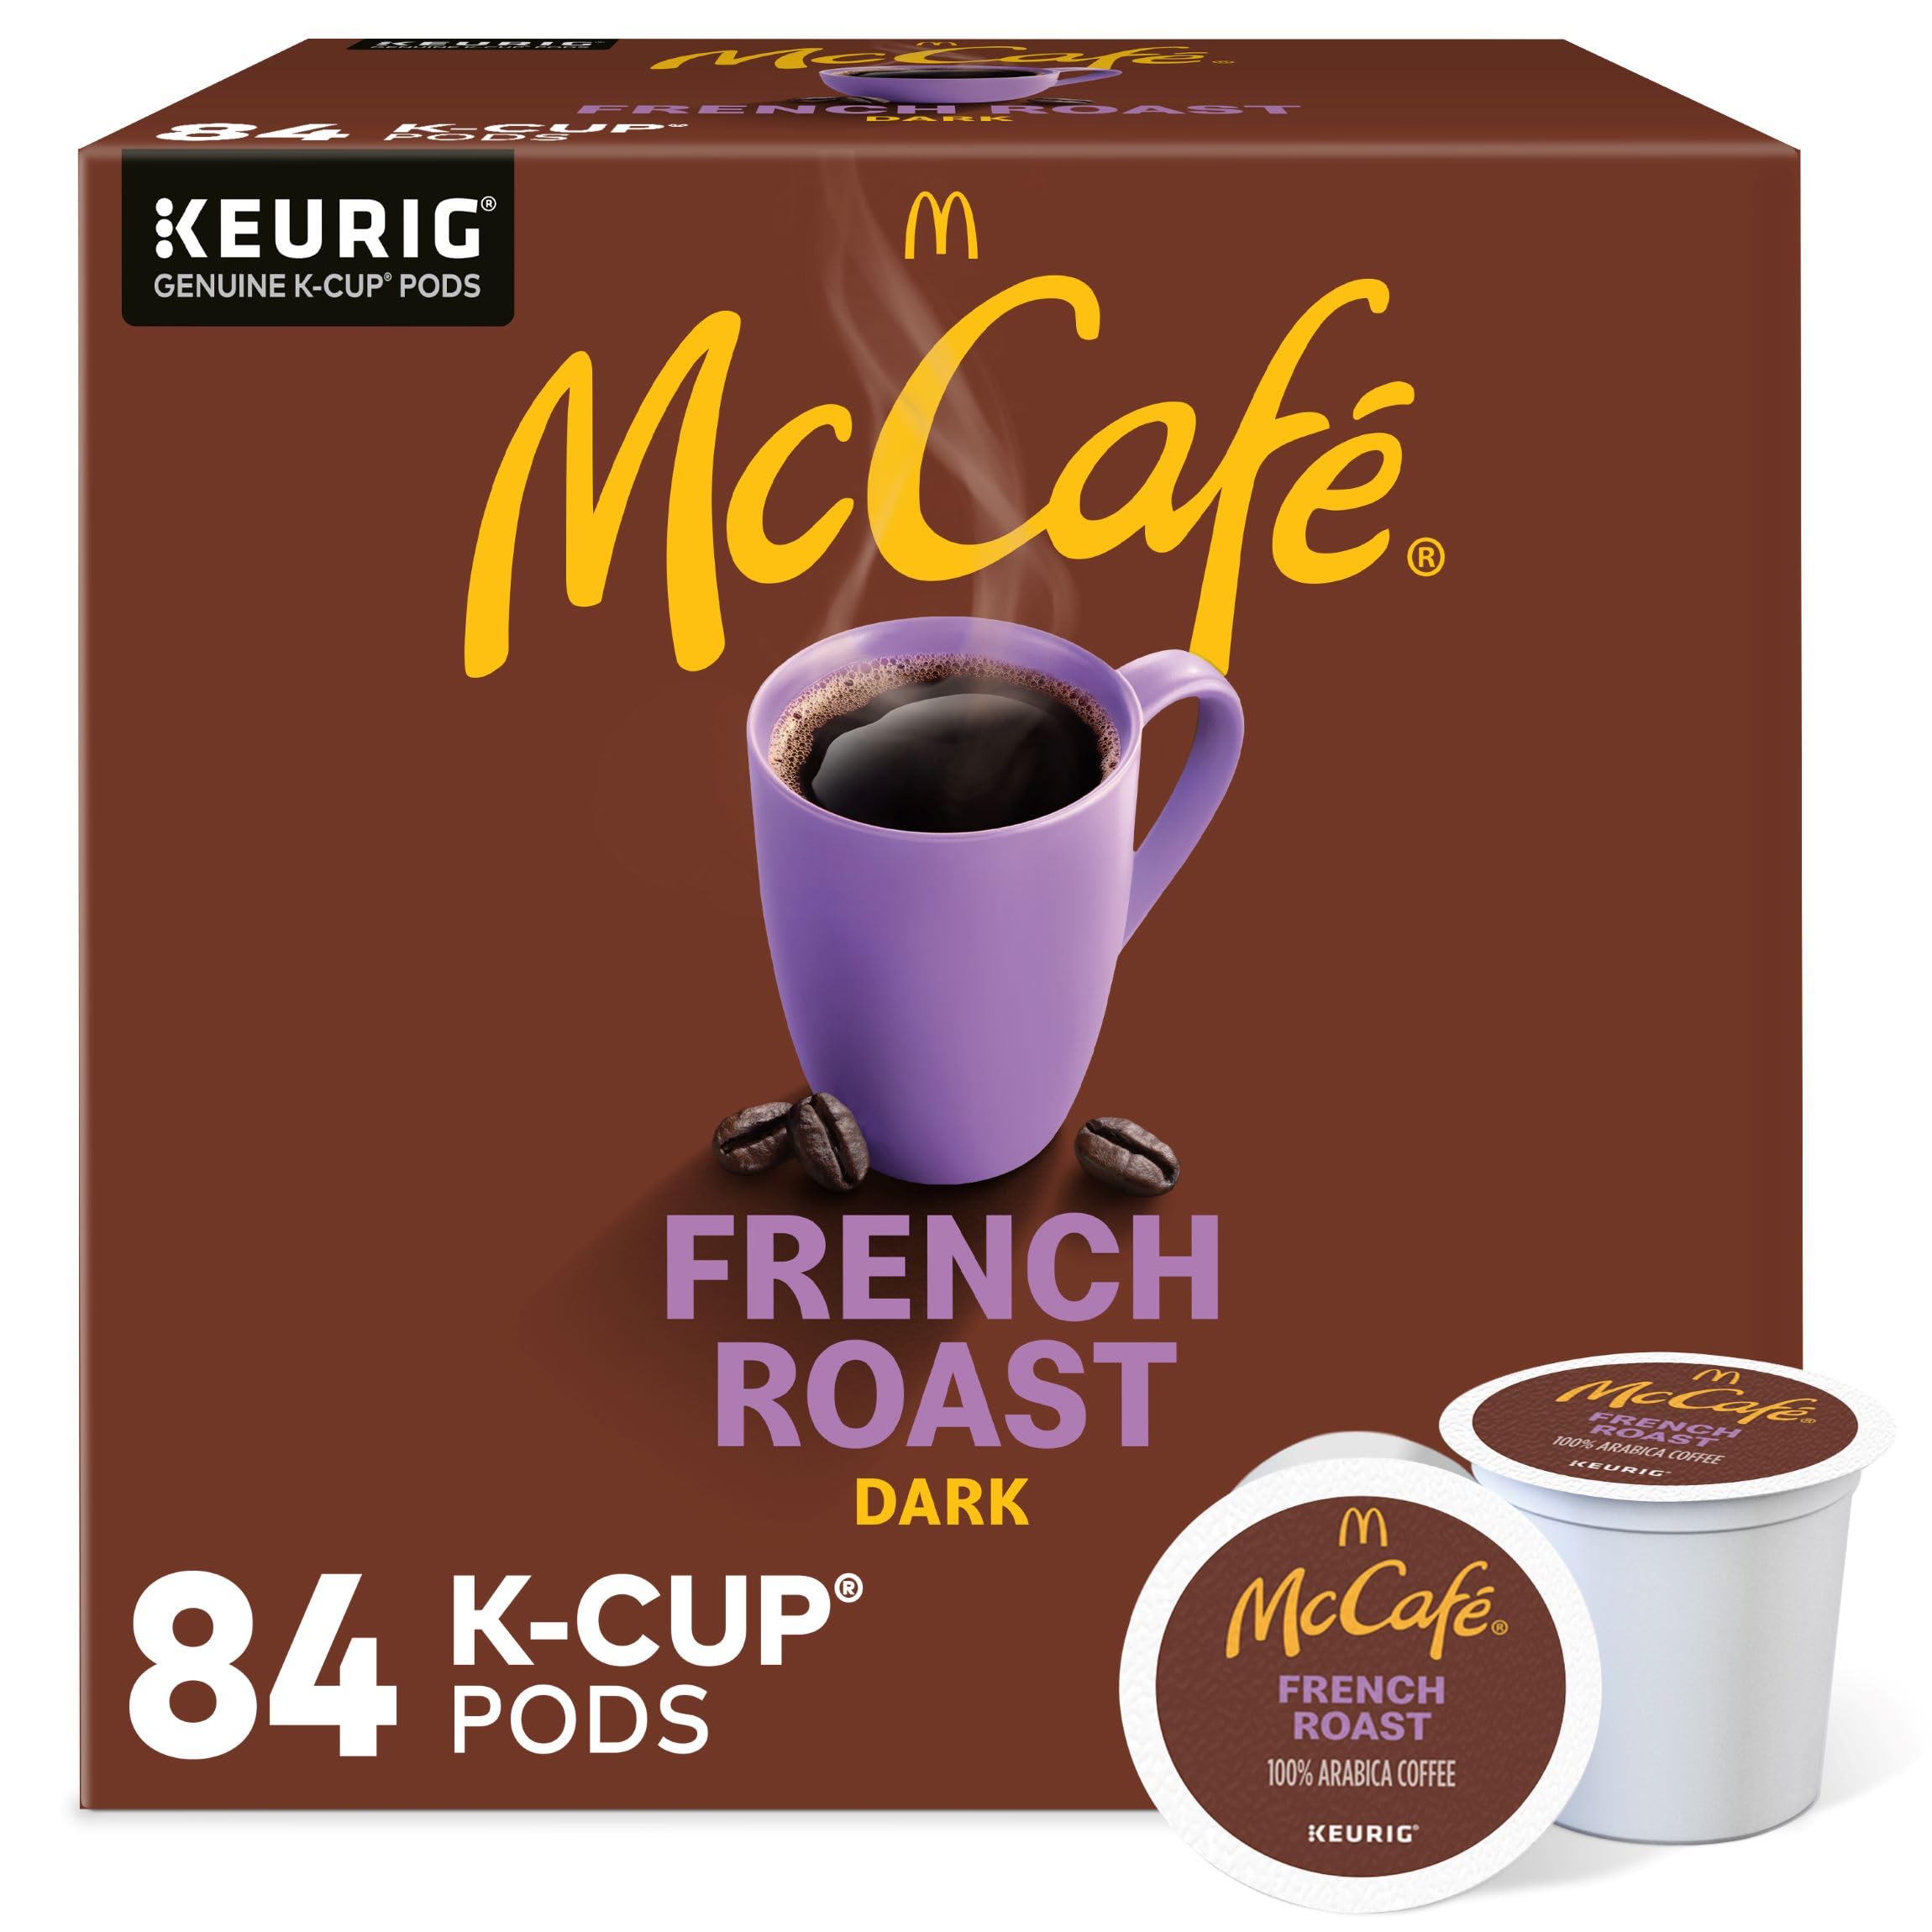 McCafe French Roast K-Cup Coffee Pods , 84 Count (Pack of 1)~$20.10 @ Amazon~Free Prime Shipping!